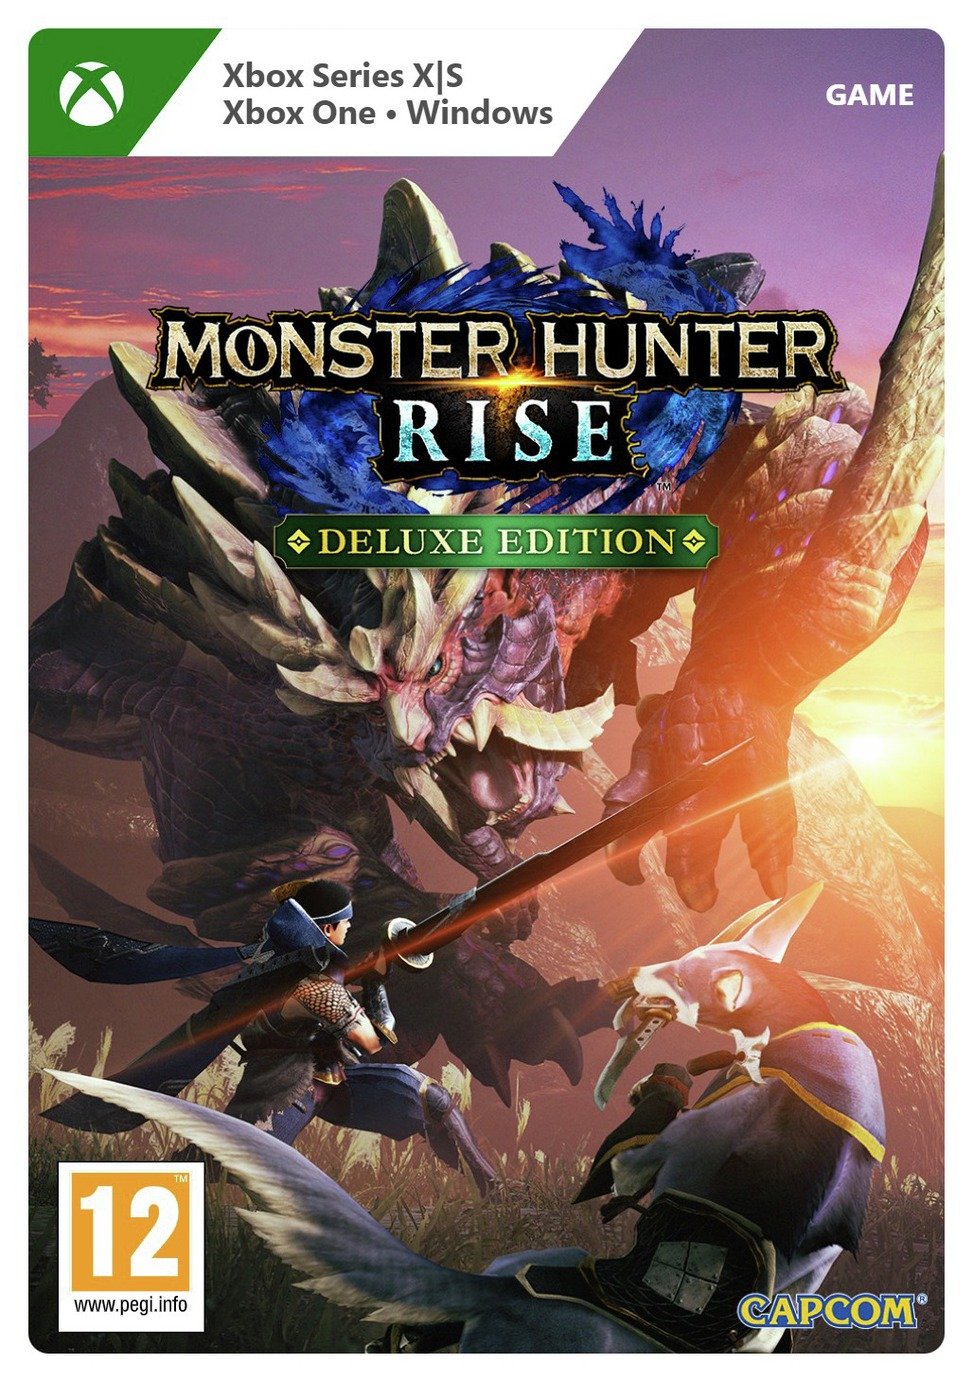 Monster Hunter Rise Deluxe Edition Xbox & PC Game